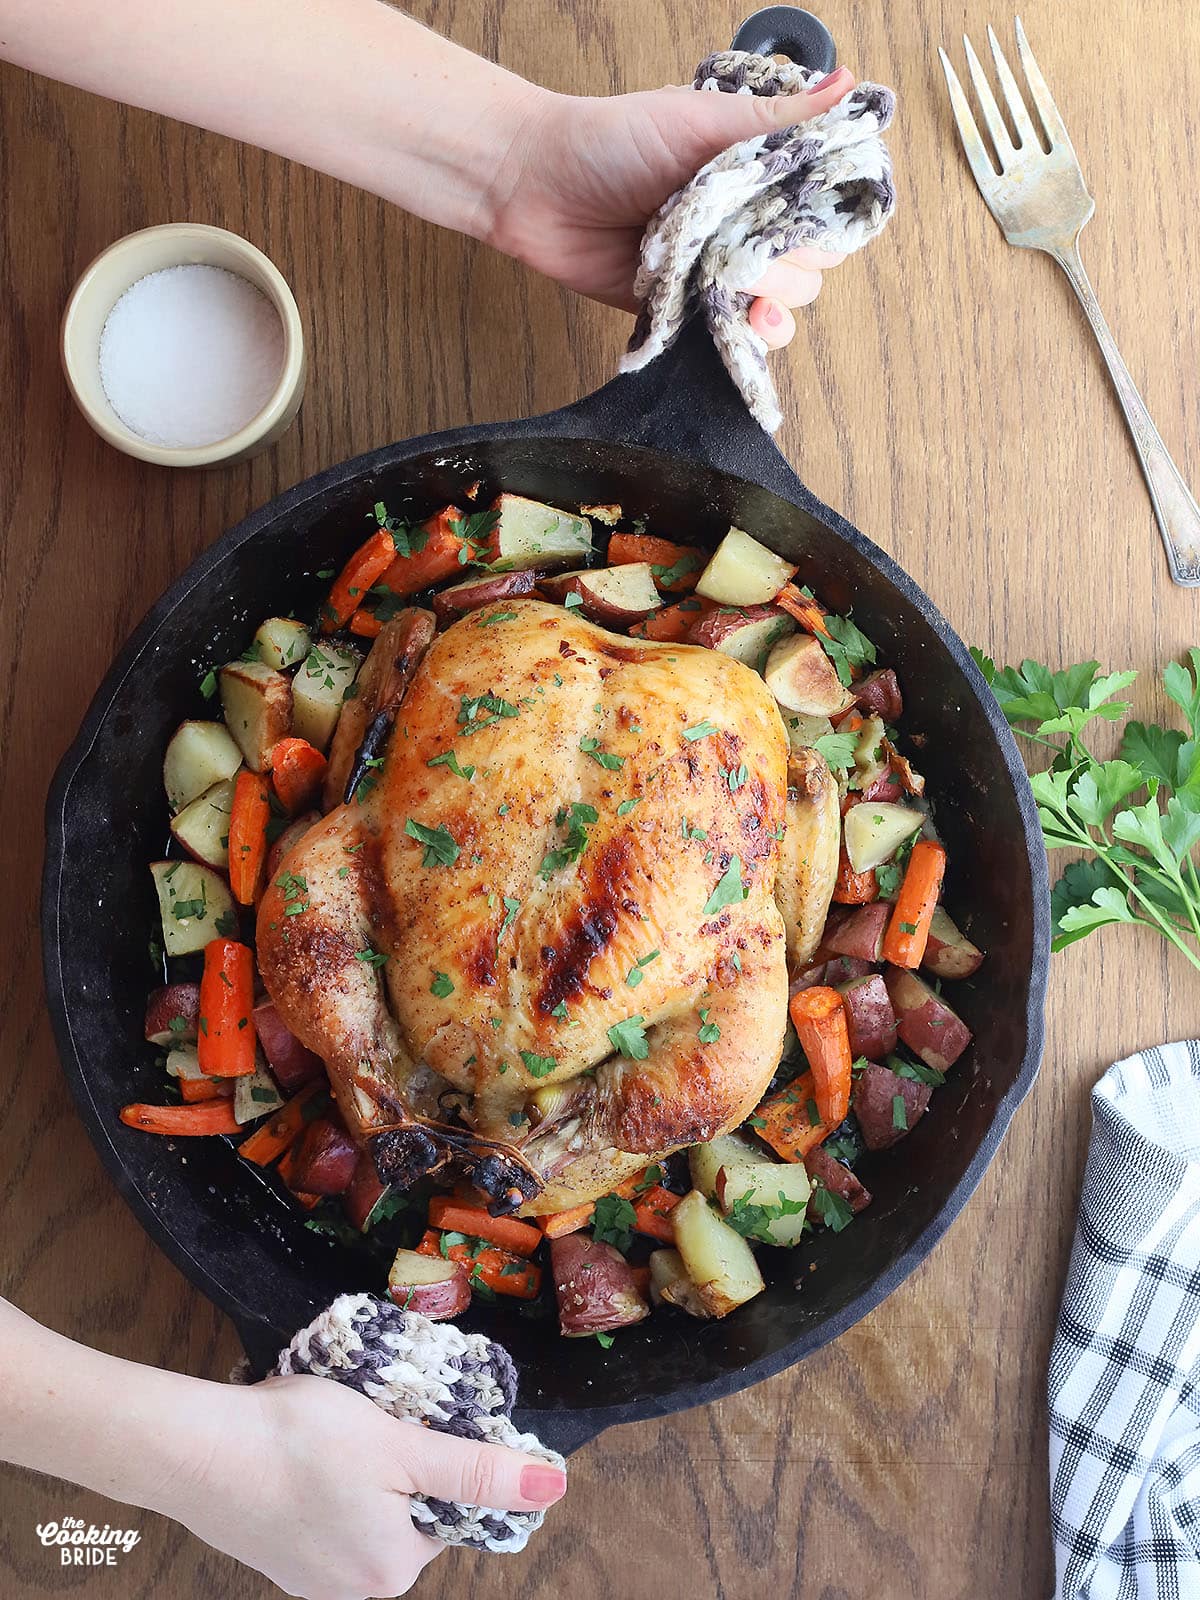 hands placing a cast iron skillet of roasted vegetables and whole chicken onto a table